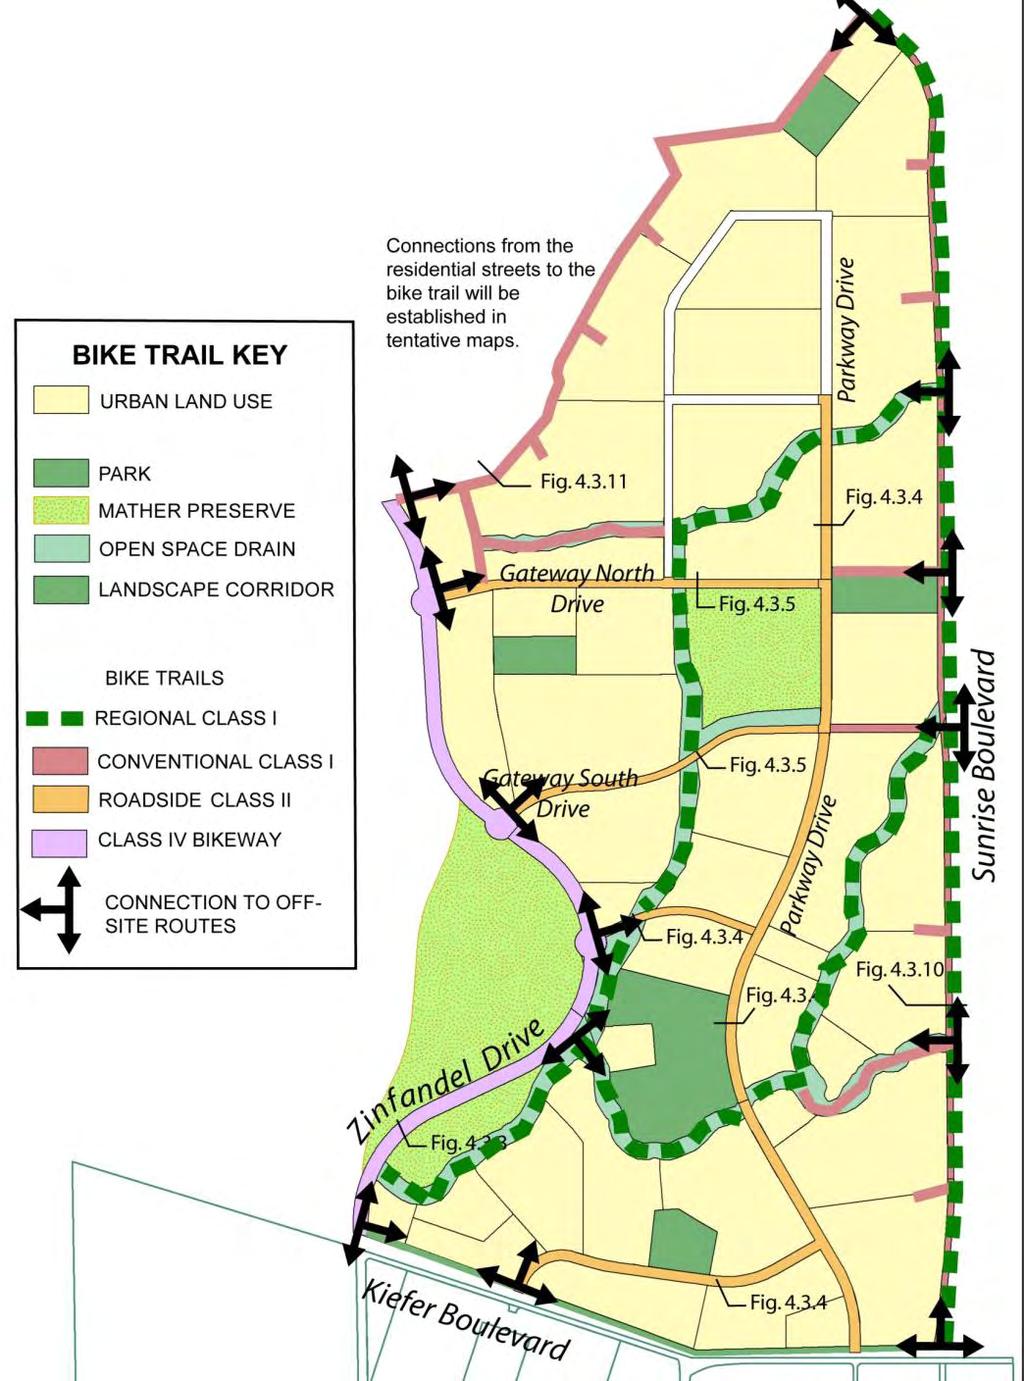 Transportation Plan The entire bikeway system will be built in phases conforming to the phased development of the Master Plan. The Phasing Plan discussed in Section 8.